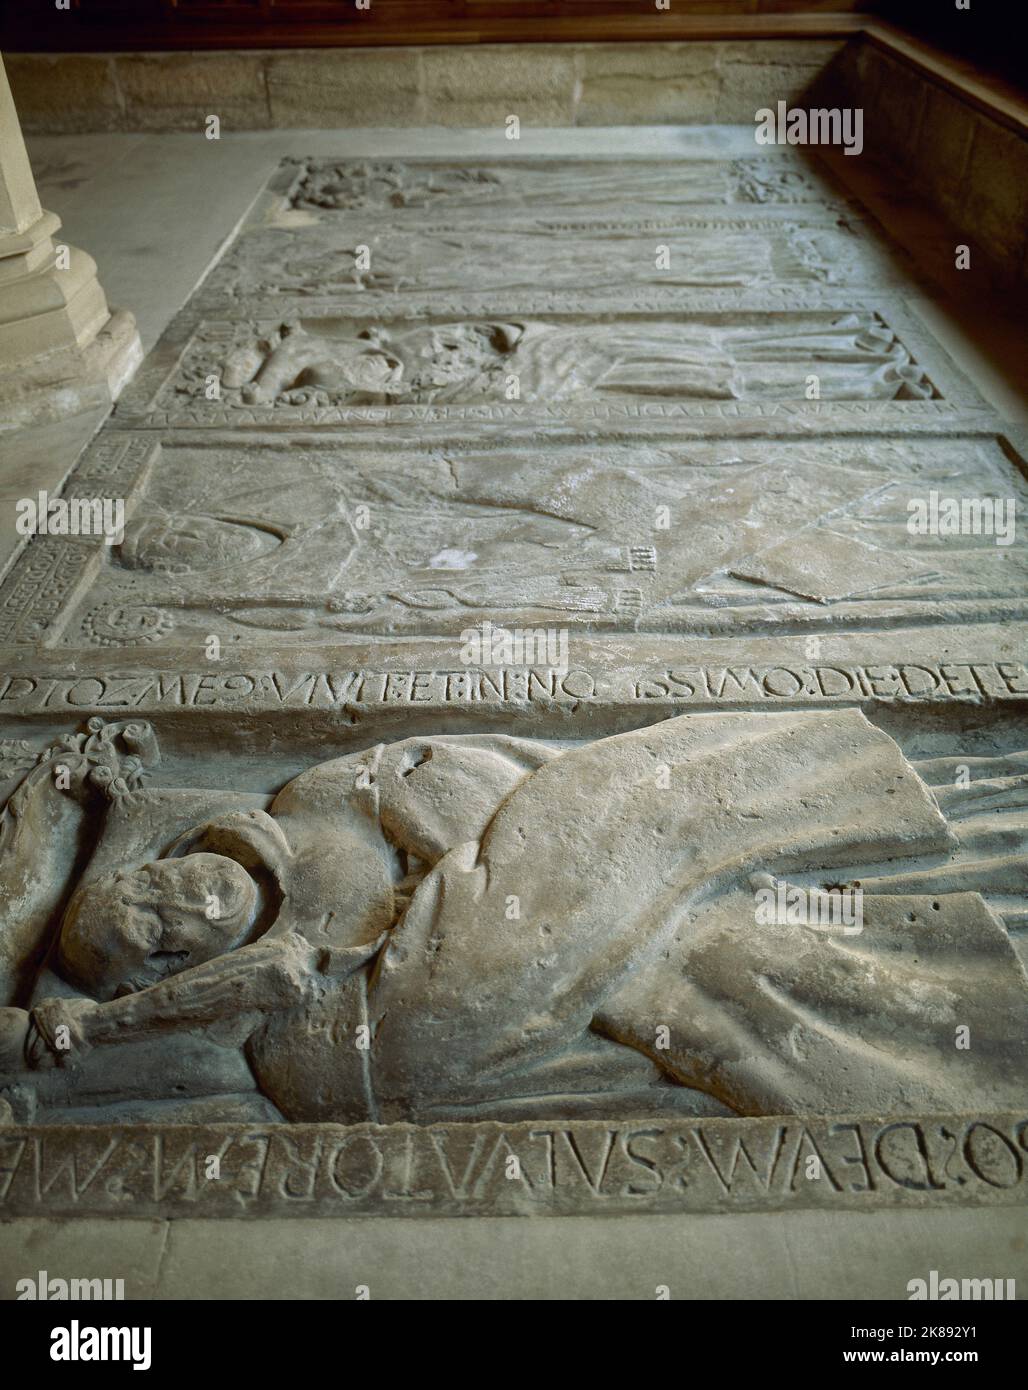 Tombs under the floor, where many abbots of the monastery were buried. Stock Photo